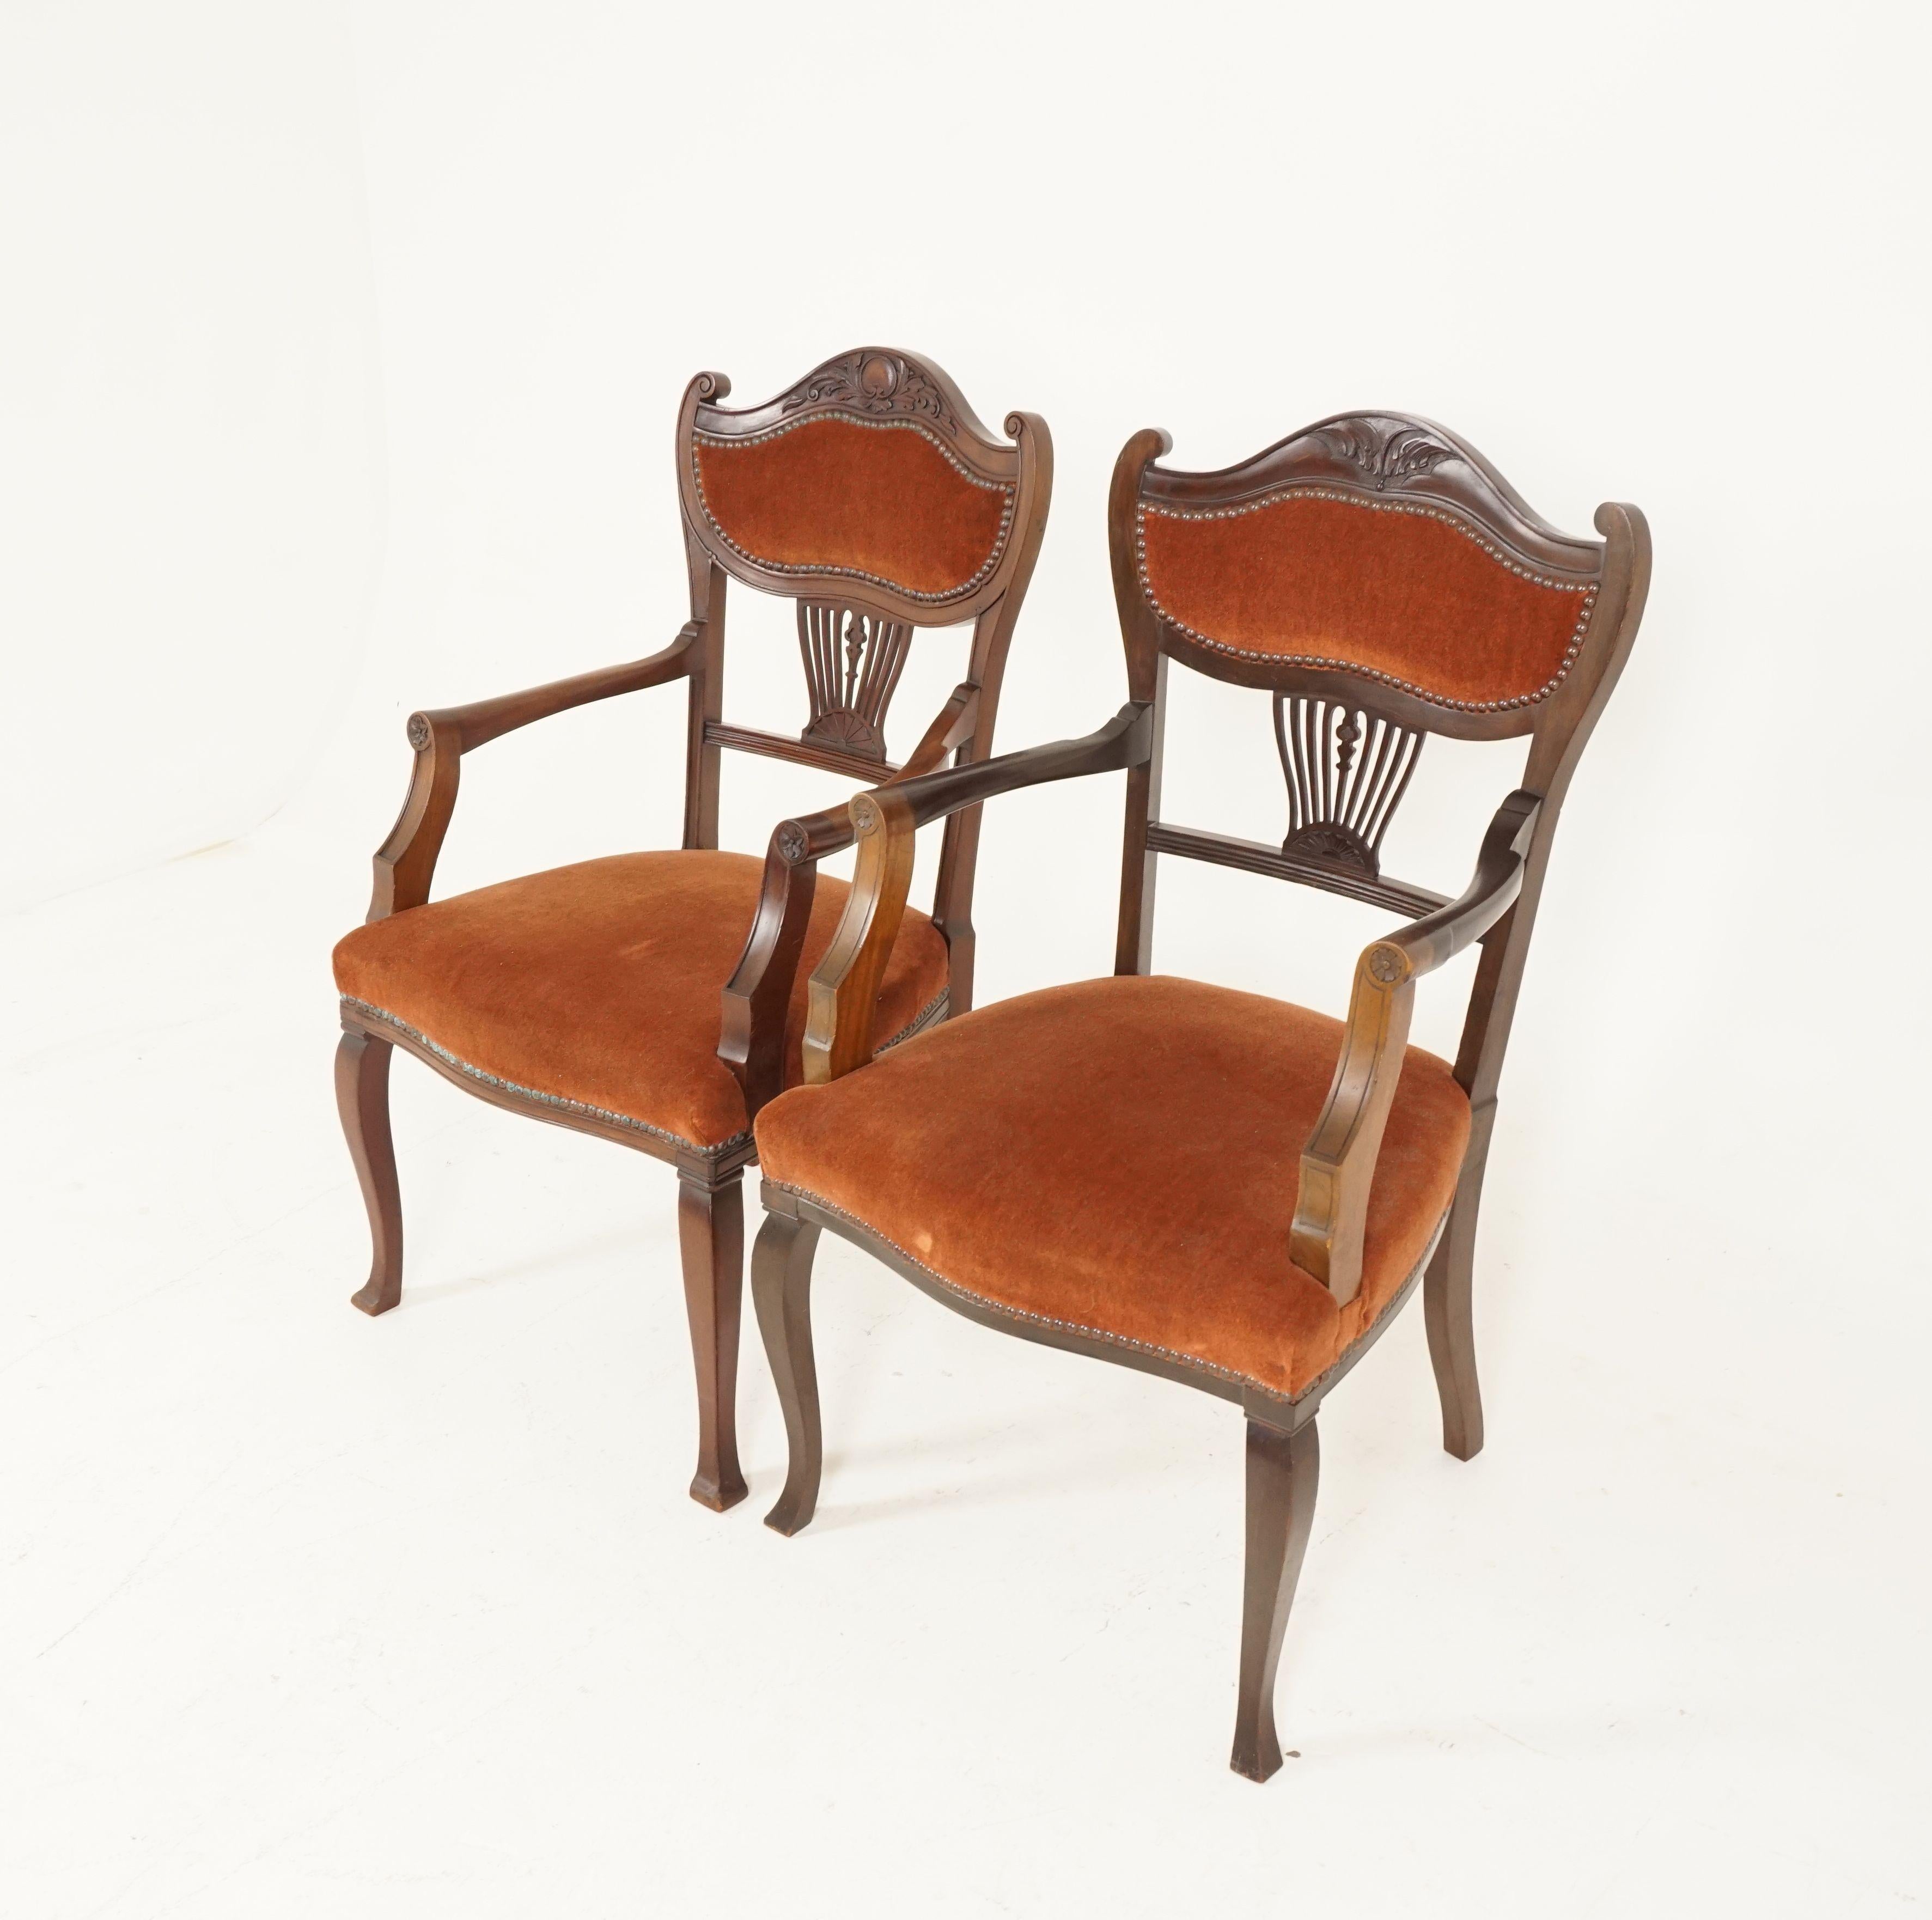 Pair Of Antique Walnut Arm Chairs, Edwardian, Art Nouveau, Upholstered Seat, Scotland 1910, B2344

Scotland 1910
Solid Walnut
Original Finish 
Carved Back Rail With Shaped Supports On The Side 
Upholstered Top
Open Back With Central Shaped Slats